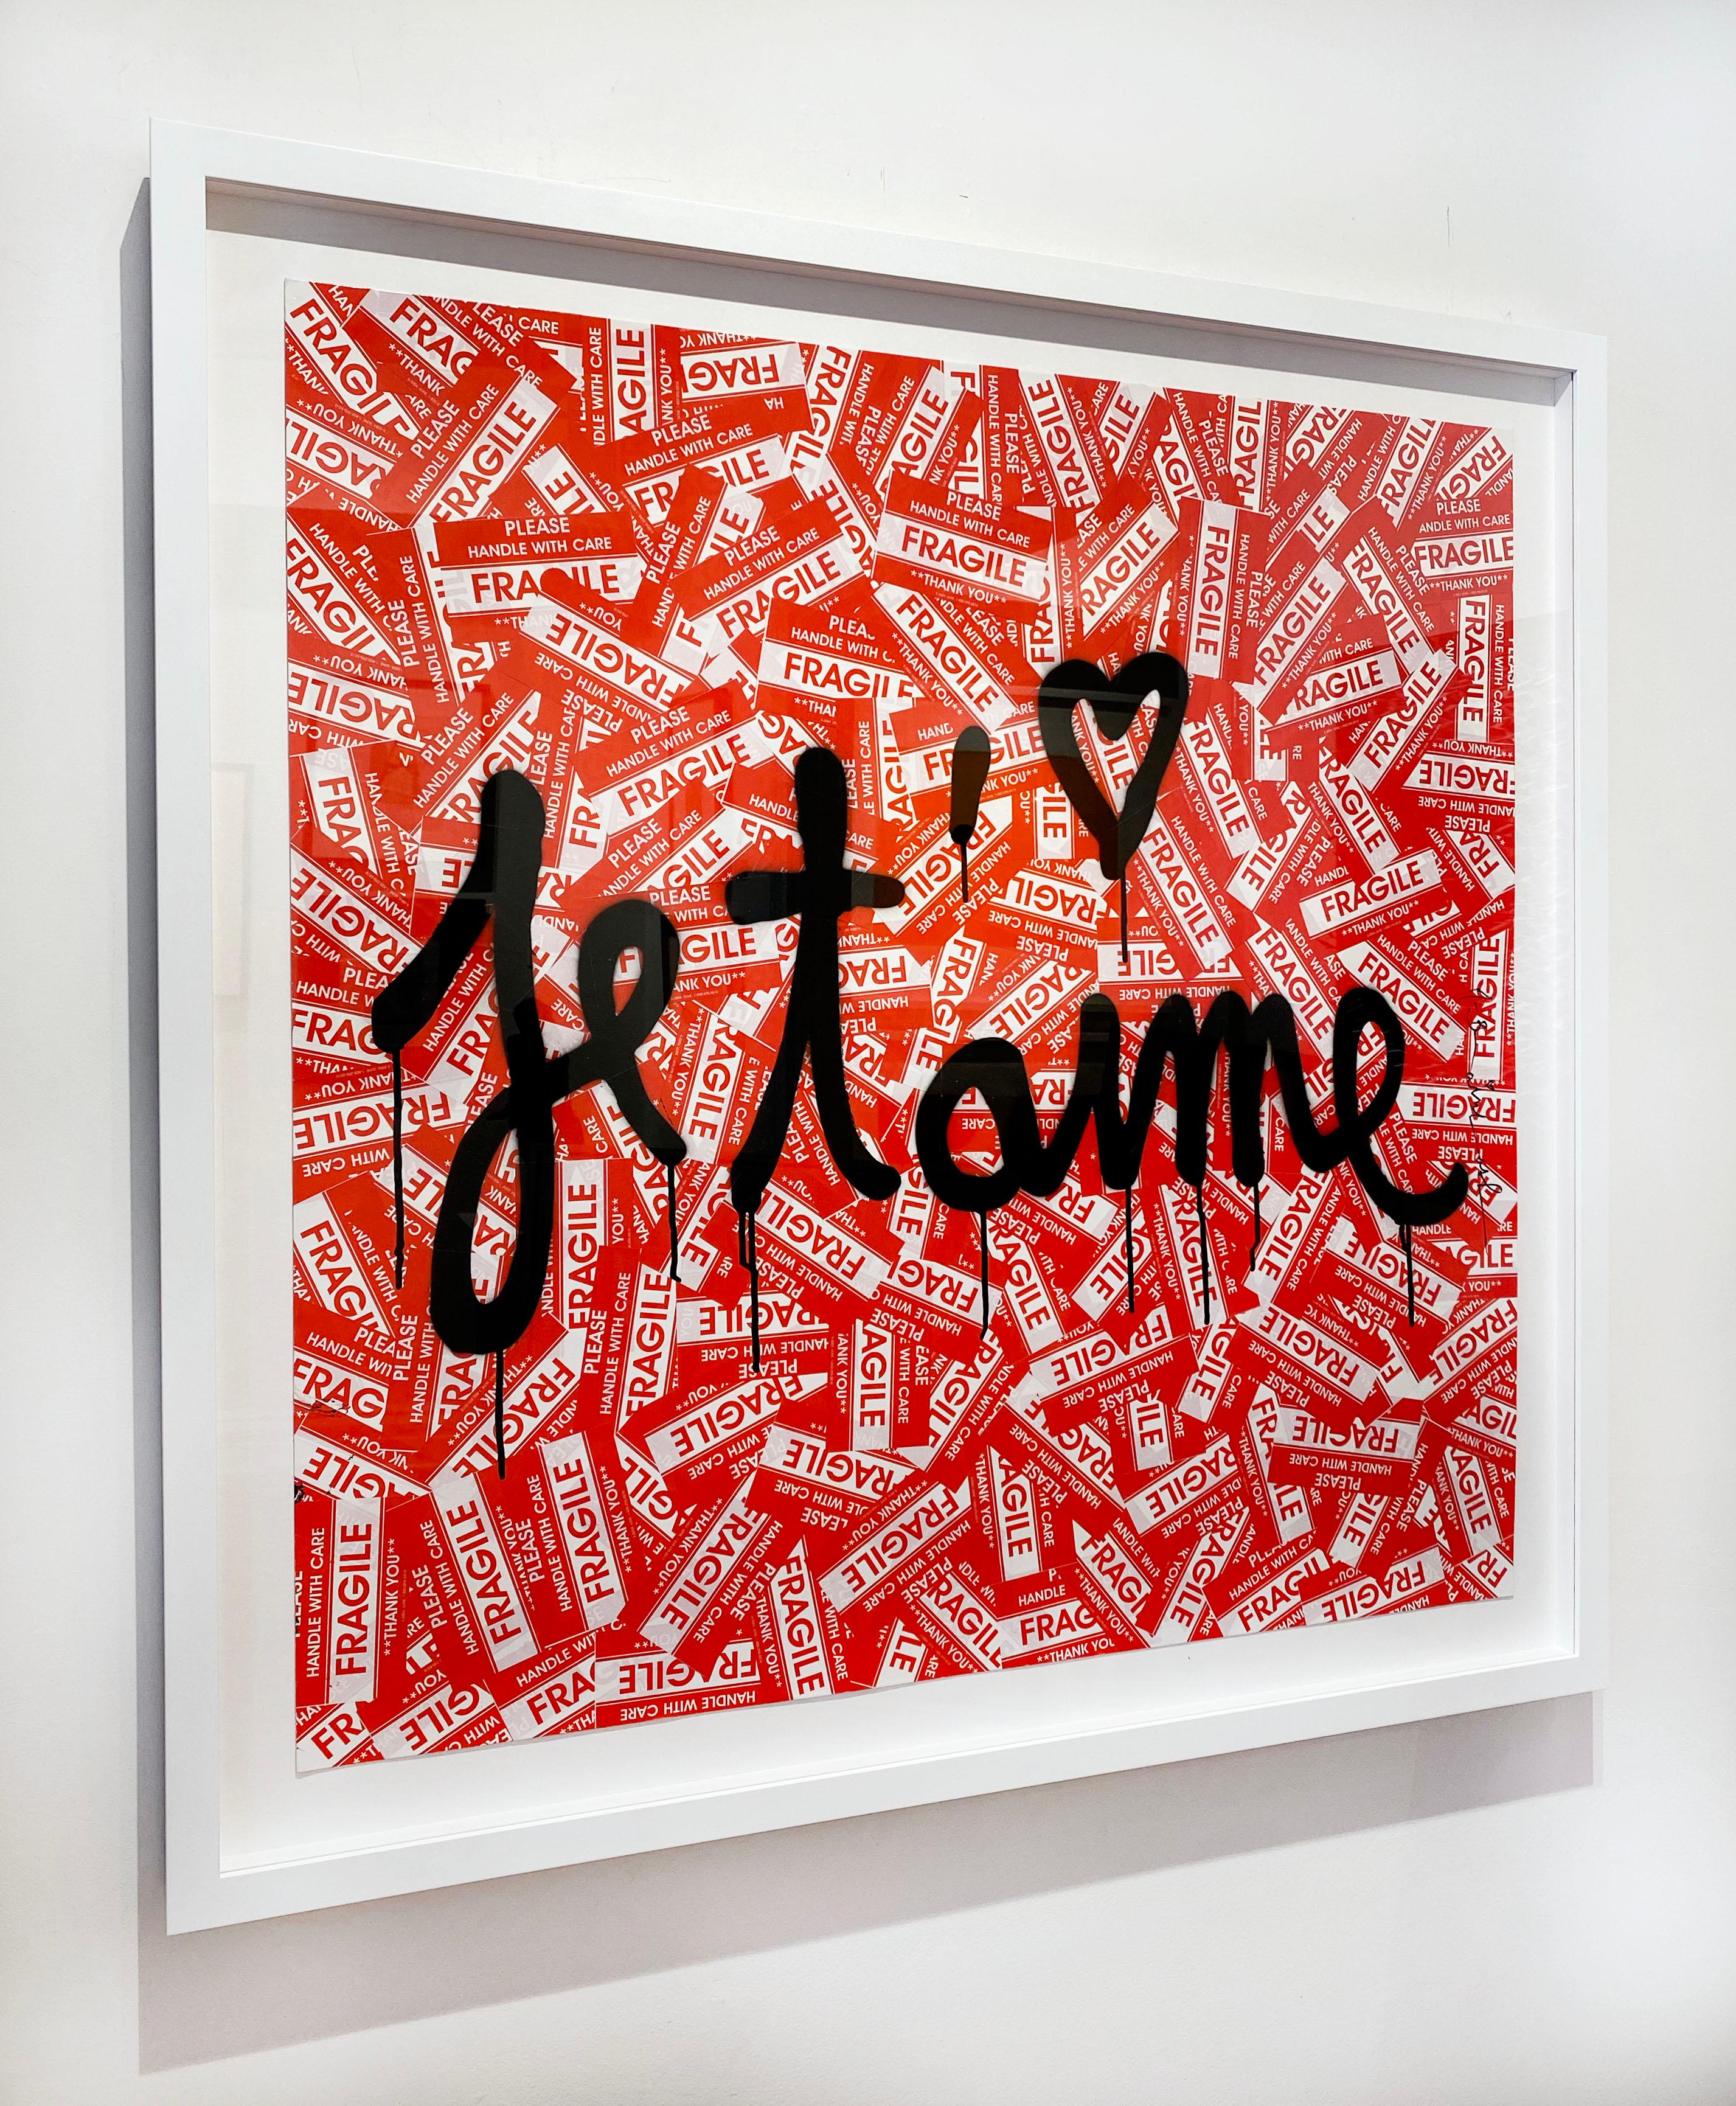 Artist:  Brainwash, Mr.
Title:  Je T’aime
Date:  2021
Medium:  Spray Paint and Stickers on Paper
Unframed Dimensions:  36